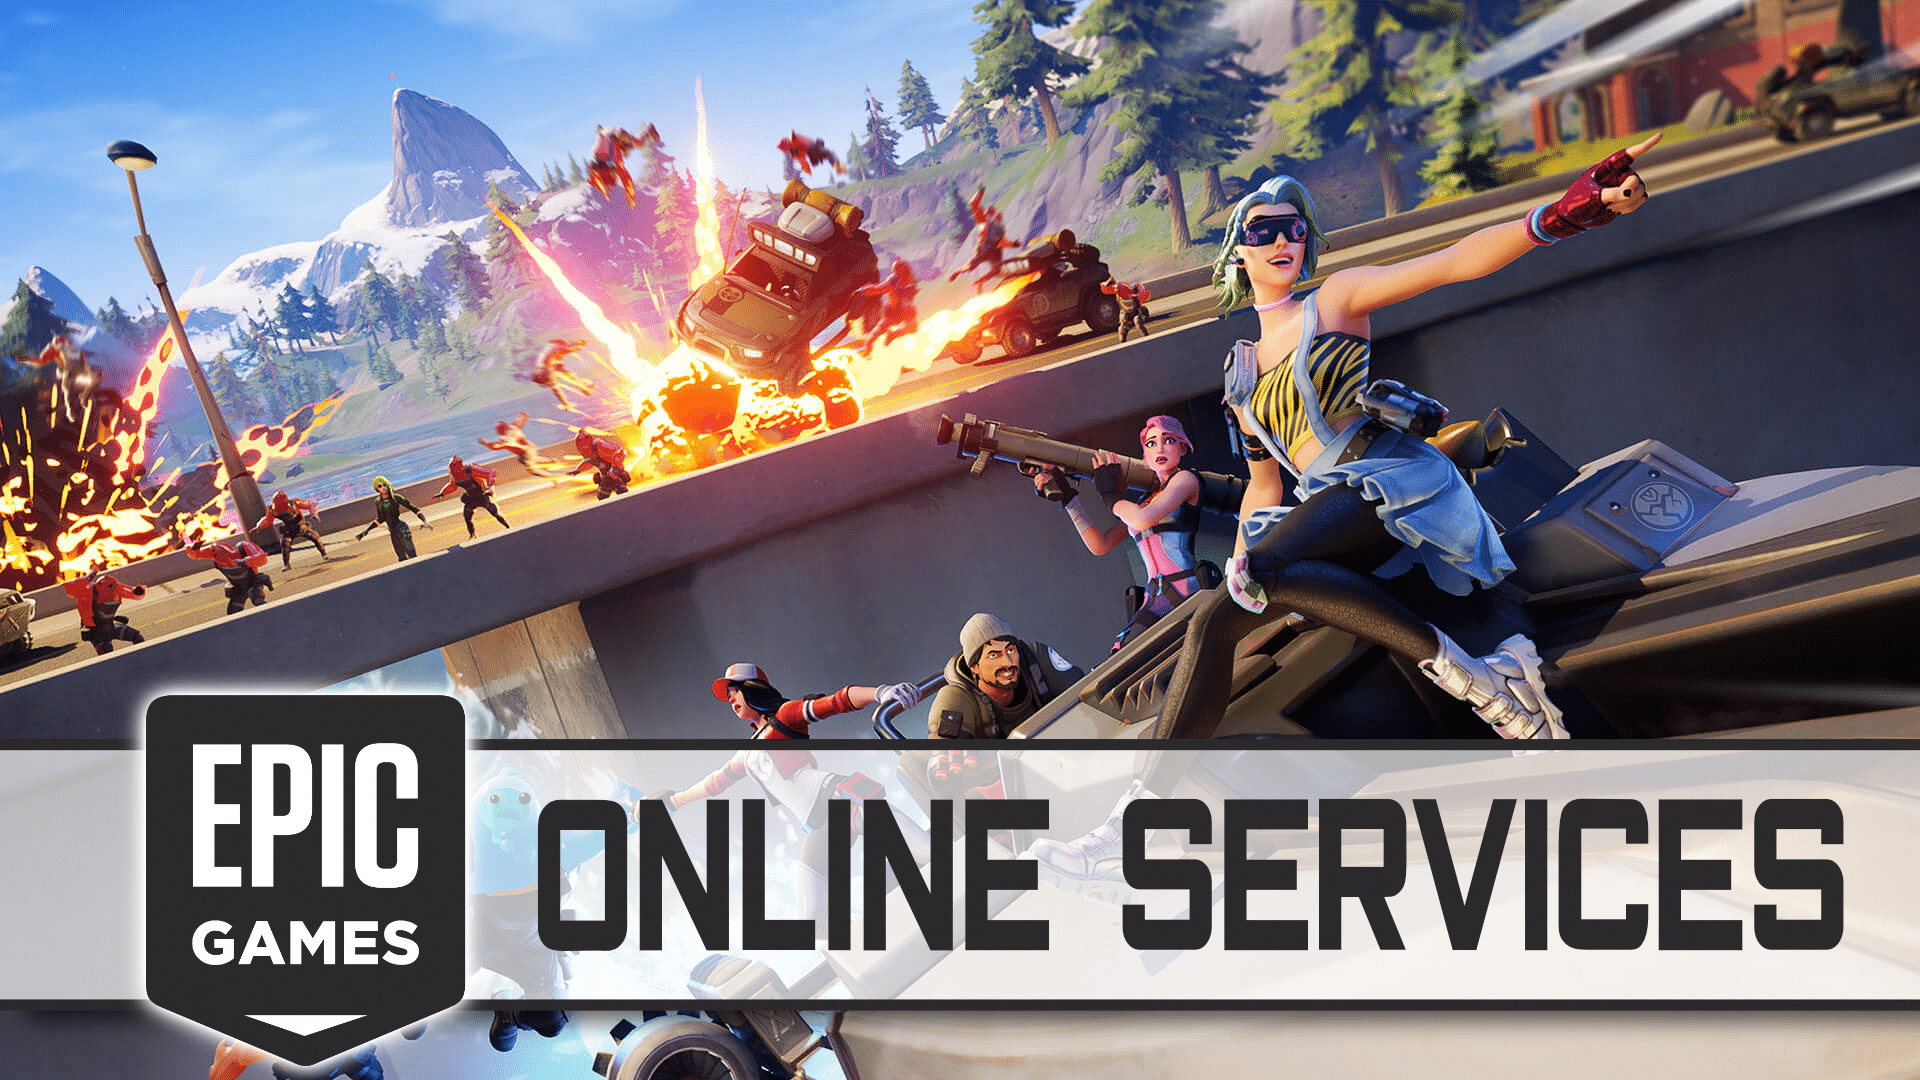 Epicgames : Epic Games | Shacknews : The services are built to work